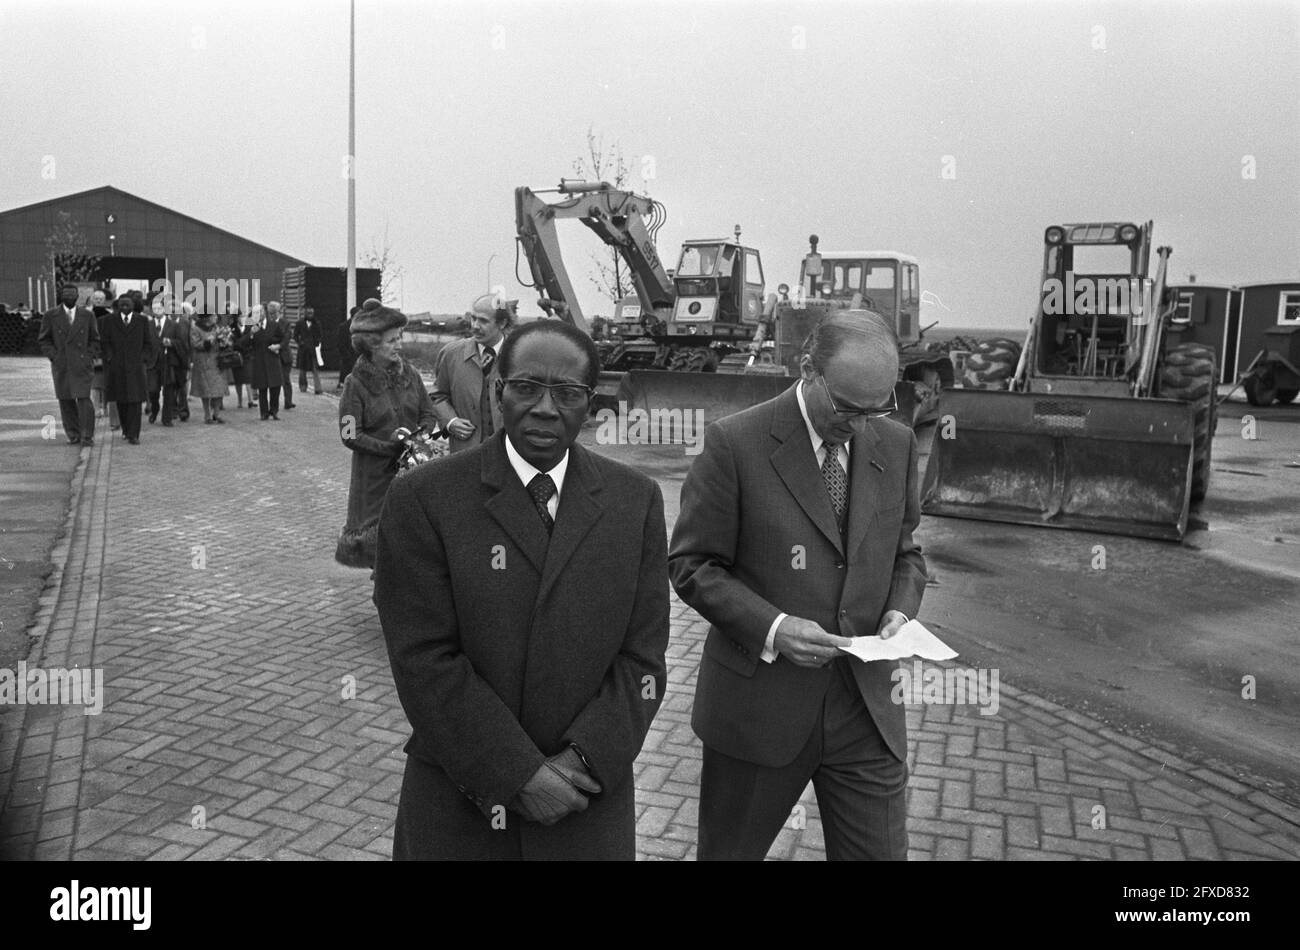 President Senghor (Senegal) visits Central Workshop for the Rijksdienst IJsselmeerpolders in Lelystad, 23 October 1974, Presidents, state visits, The Netherlands, 20th century press agency photo, news to remember, documentary, historic photography 1945-1990, visual stories, human history of the Twentieth Century, capturing moments in time Stock Photo